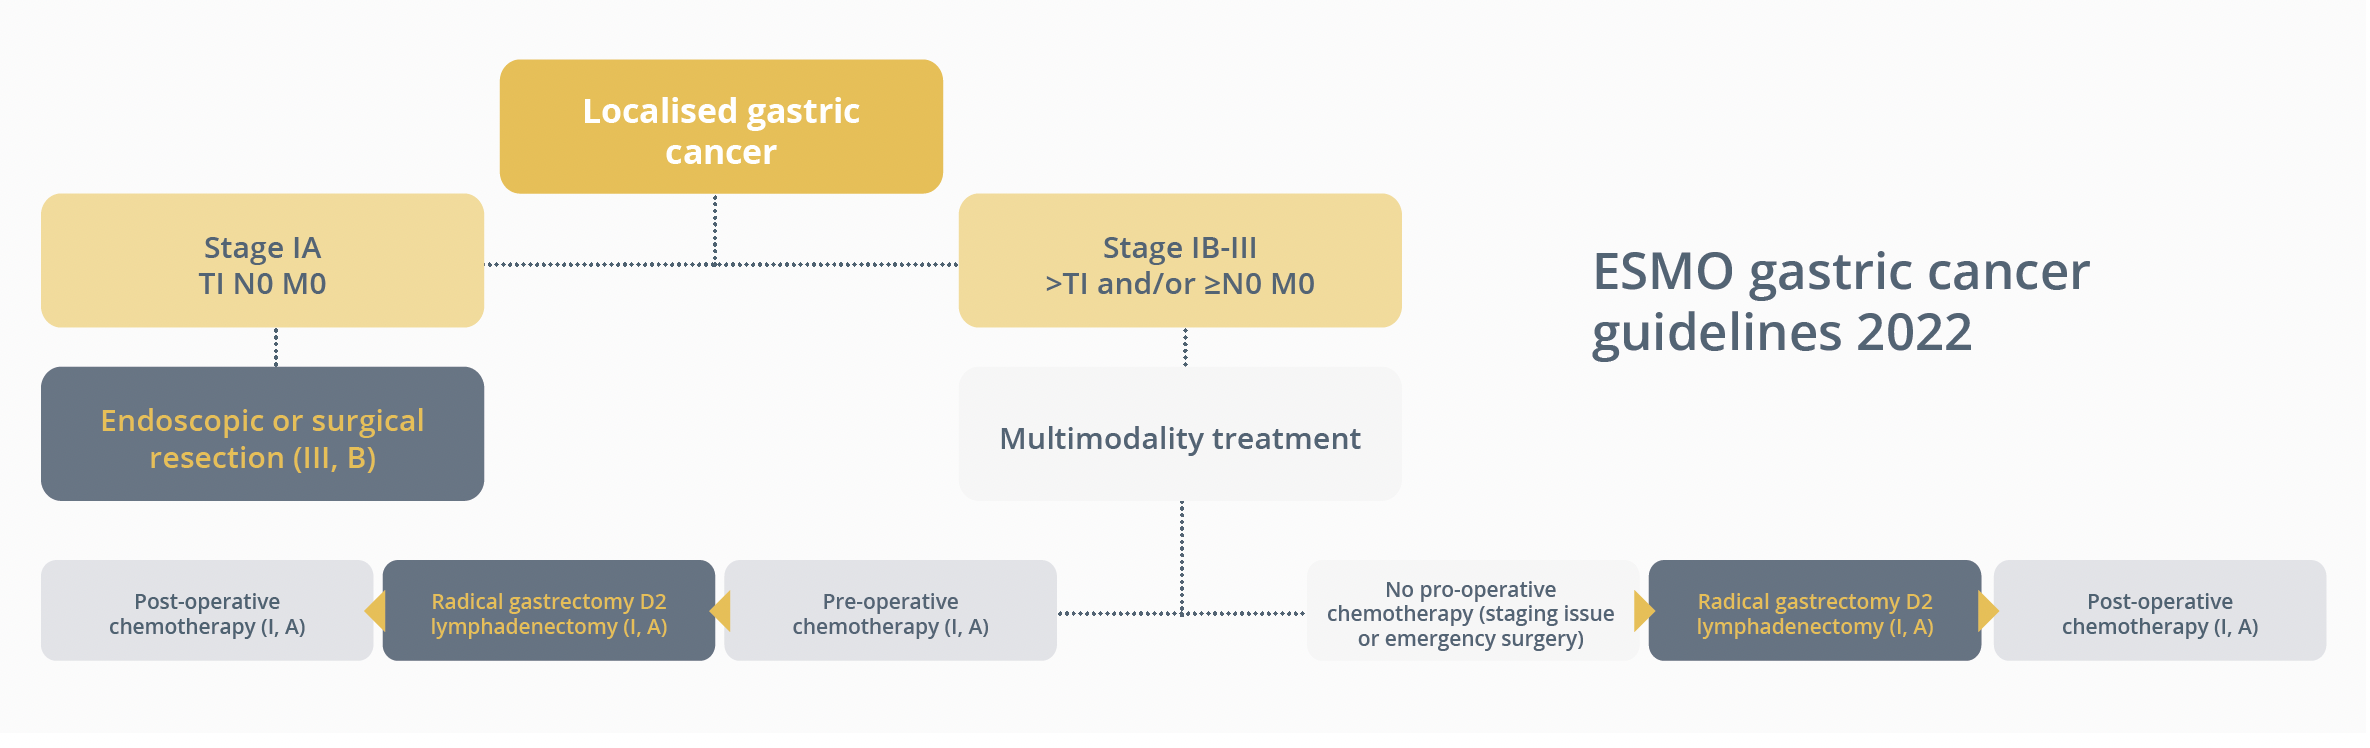 the up-to-date ESMO guidelines specifying the treatment approach for gastric cancer patients according to disease stage.